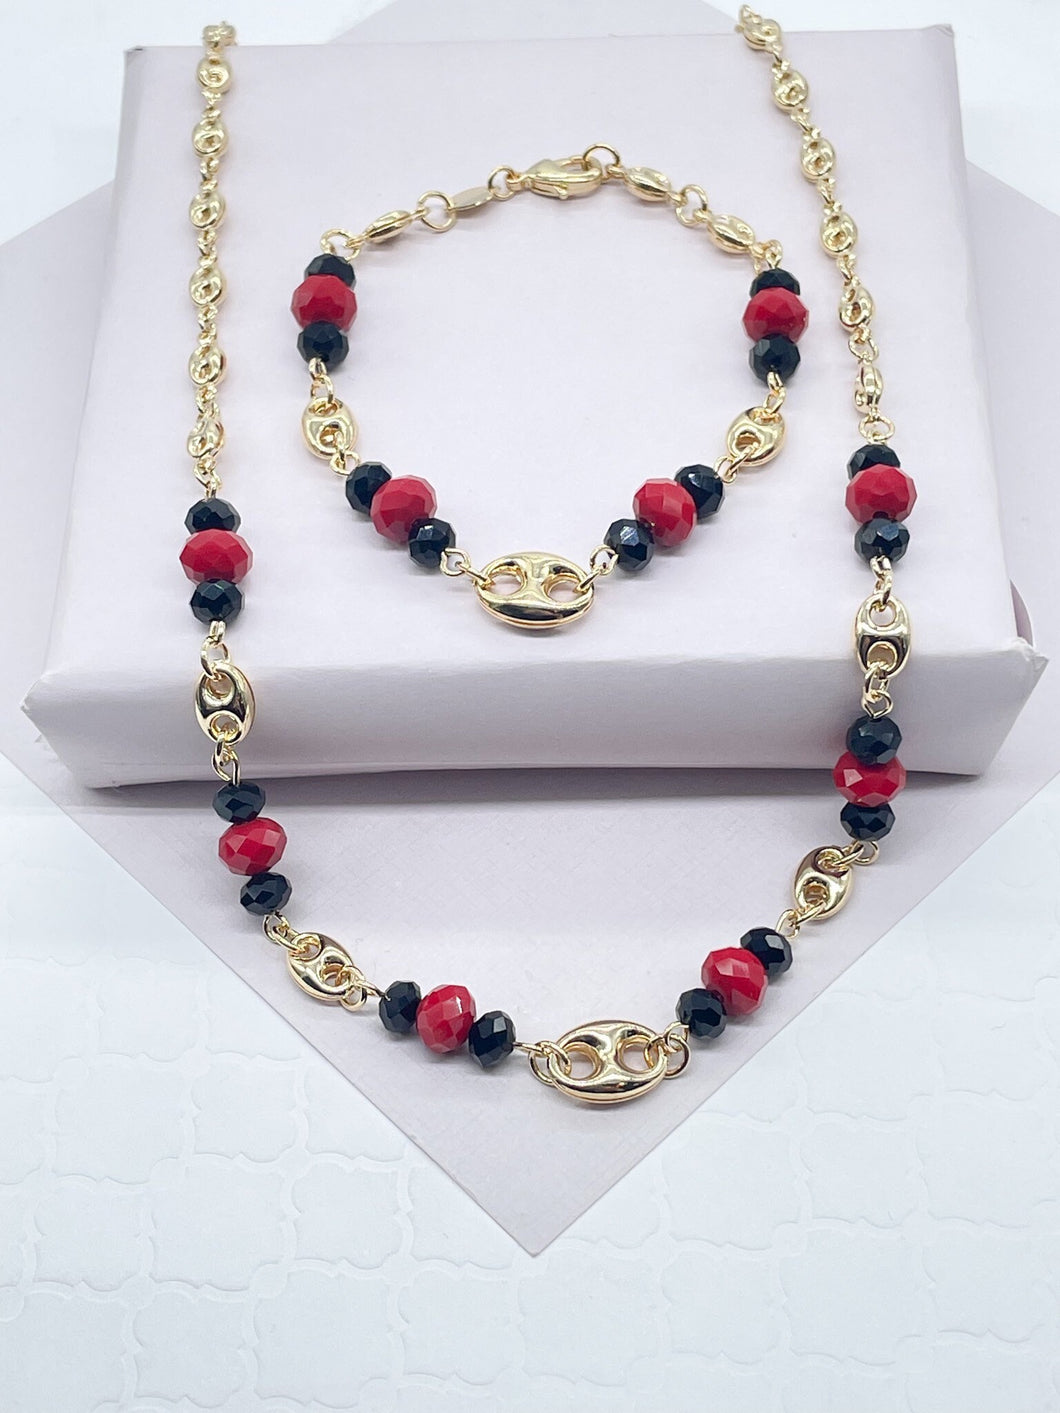 18k Gold Filled Puffy Mariner Link, Simulated Azabache, Red Shiny Bead Set, Protection Jewelry,